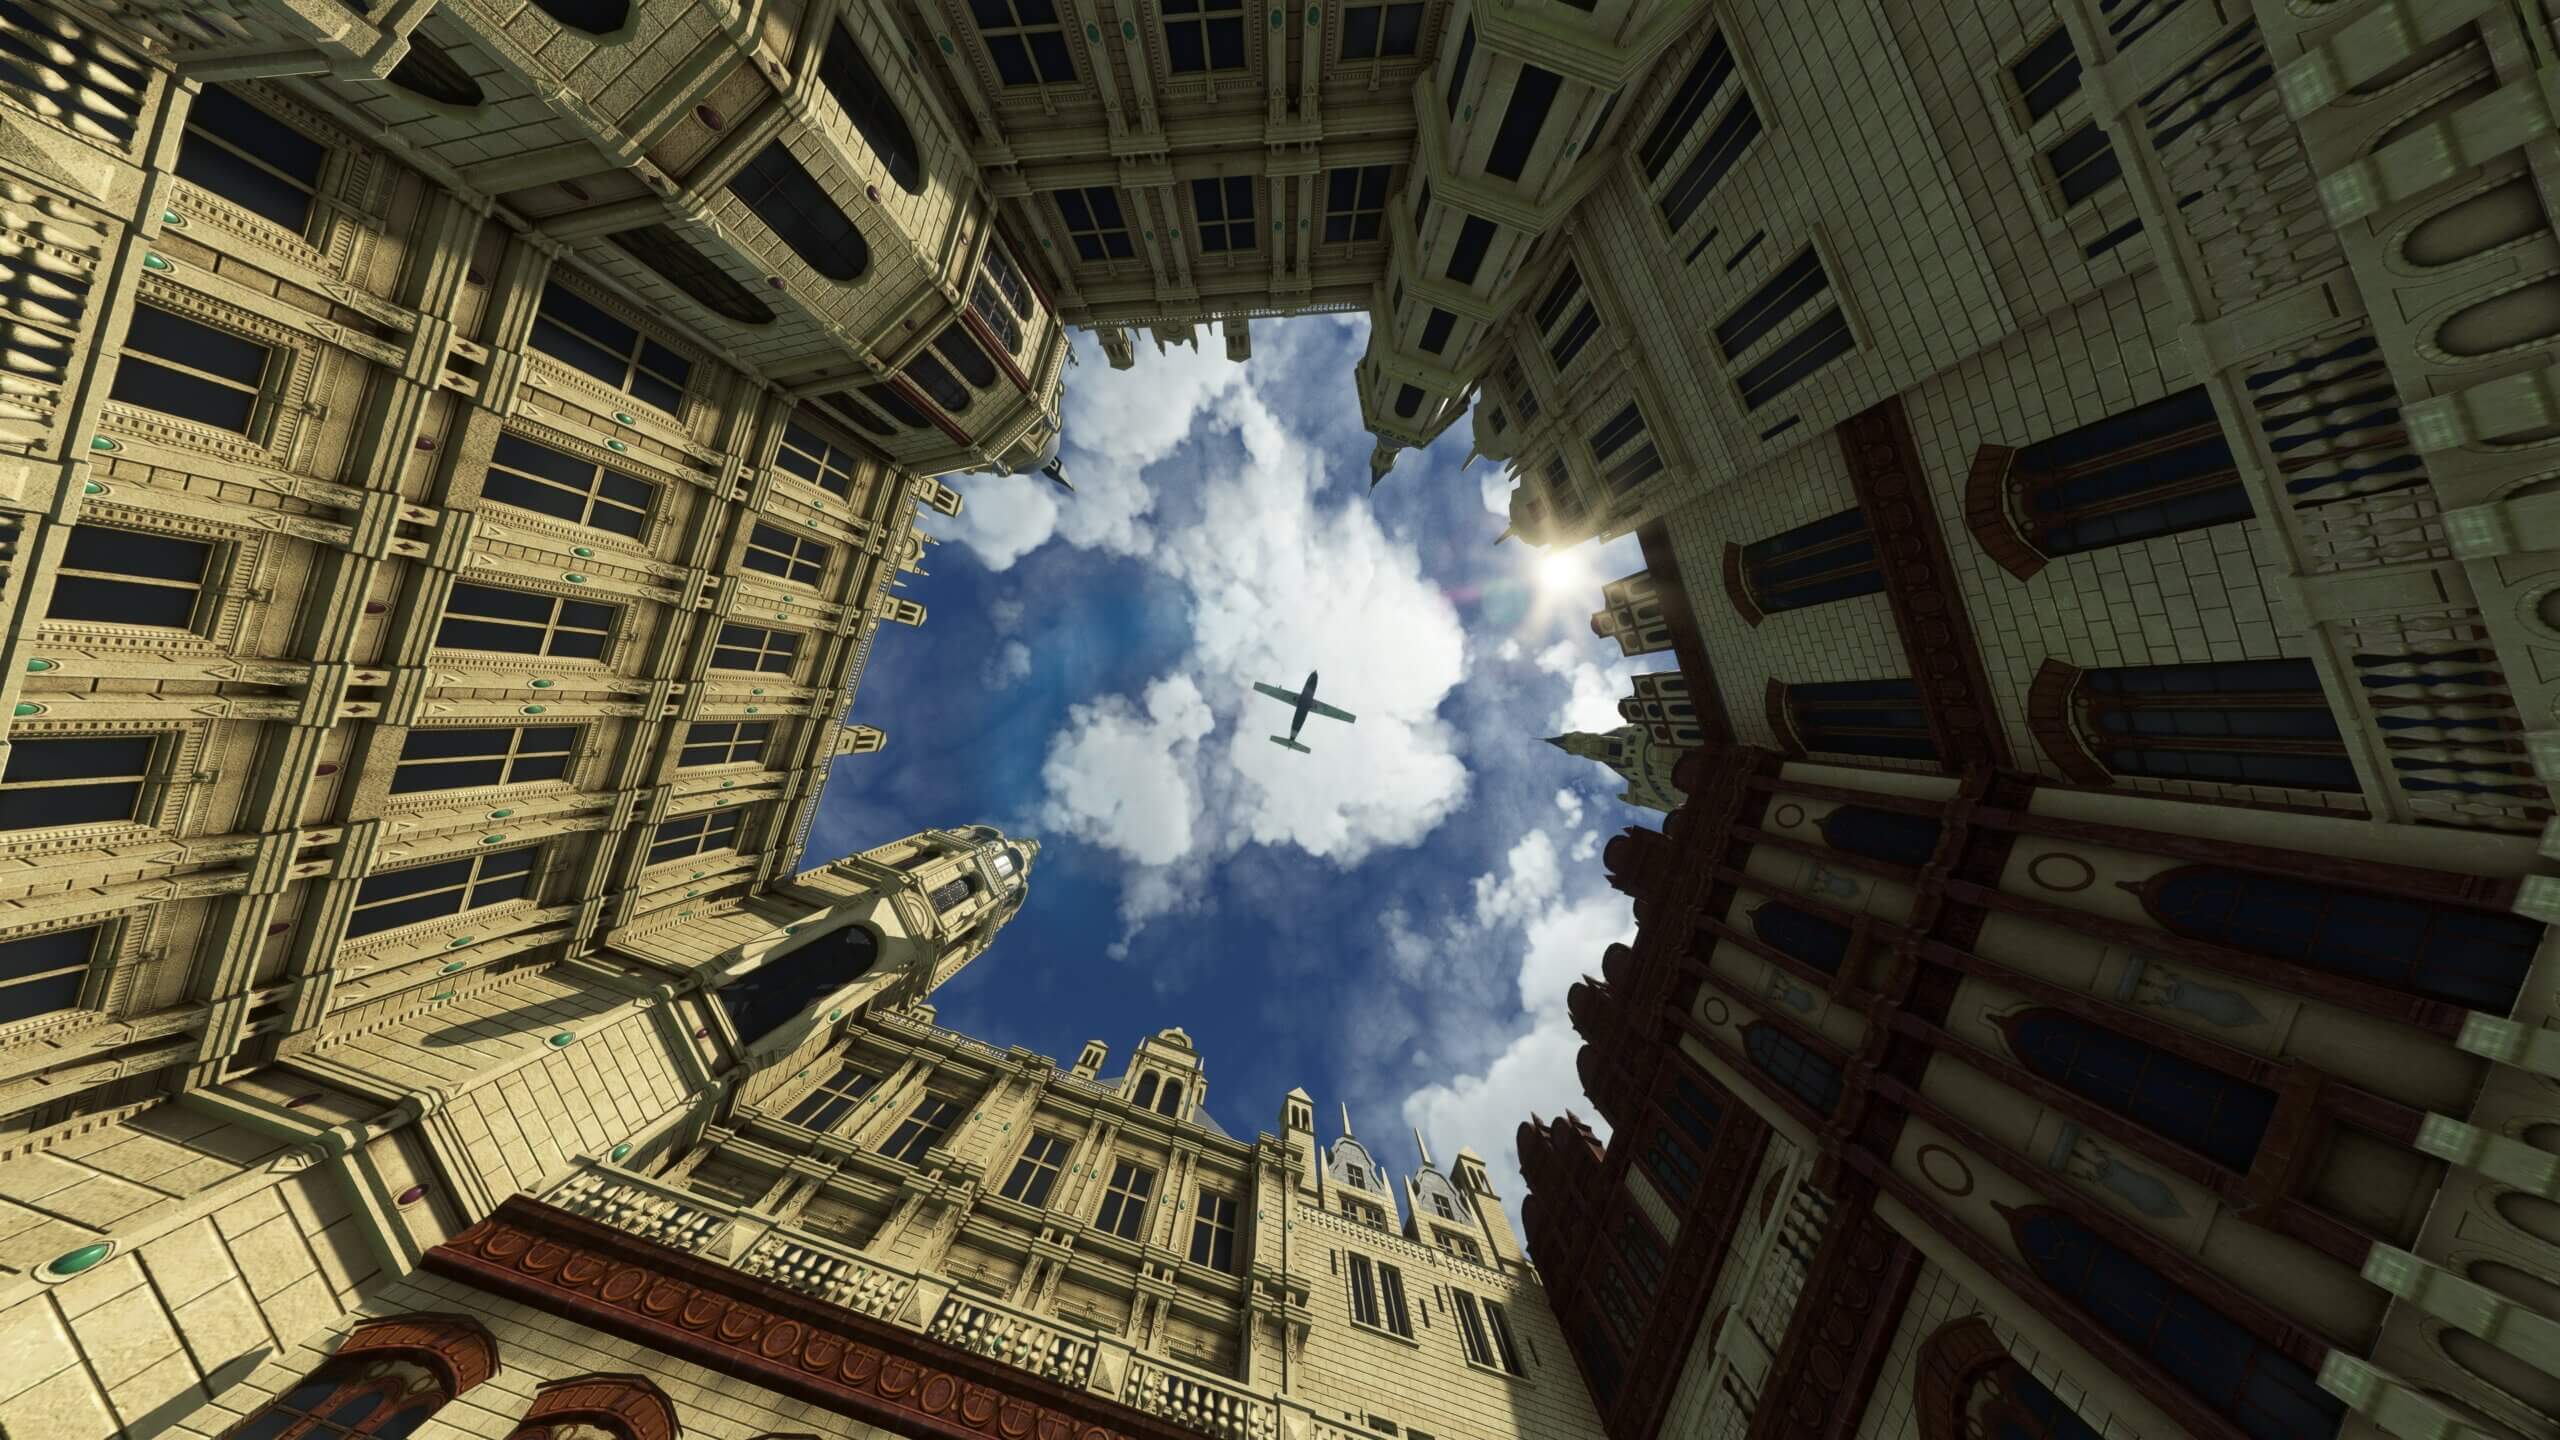 Bottom up view of a plane flying over a building courtyard. The walls of the building are on all sides of the image.